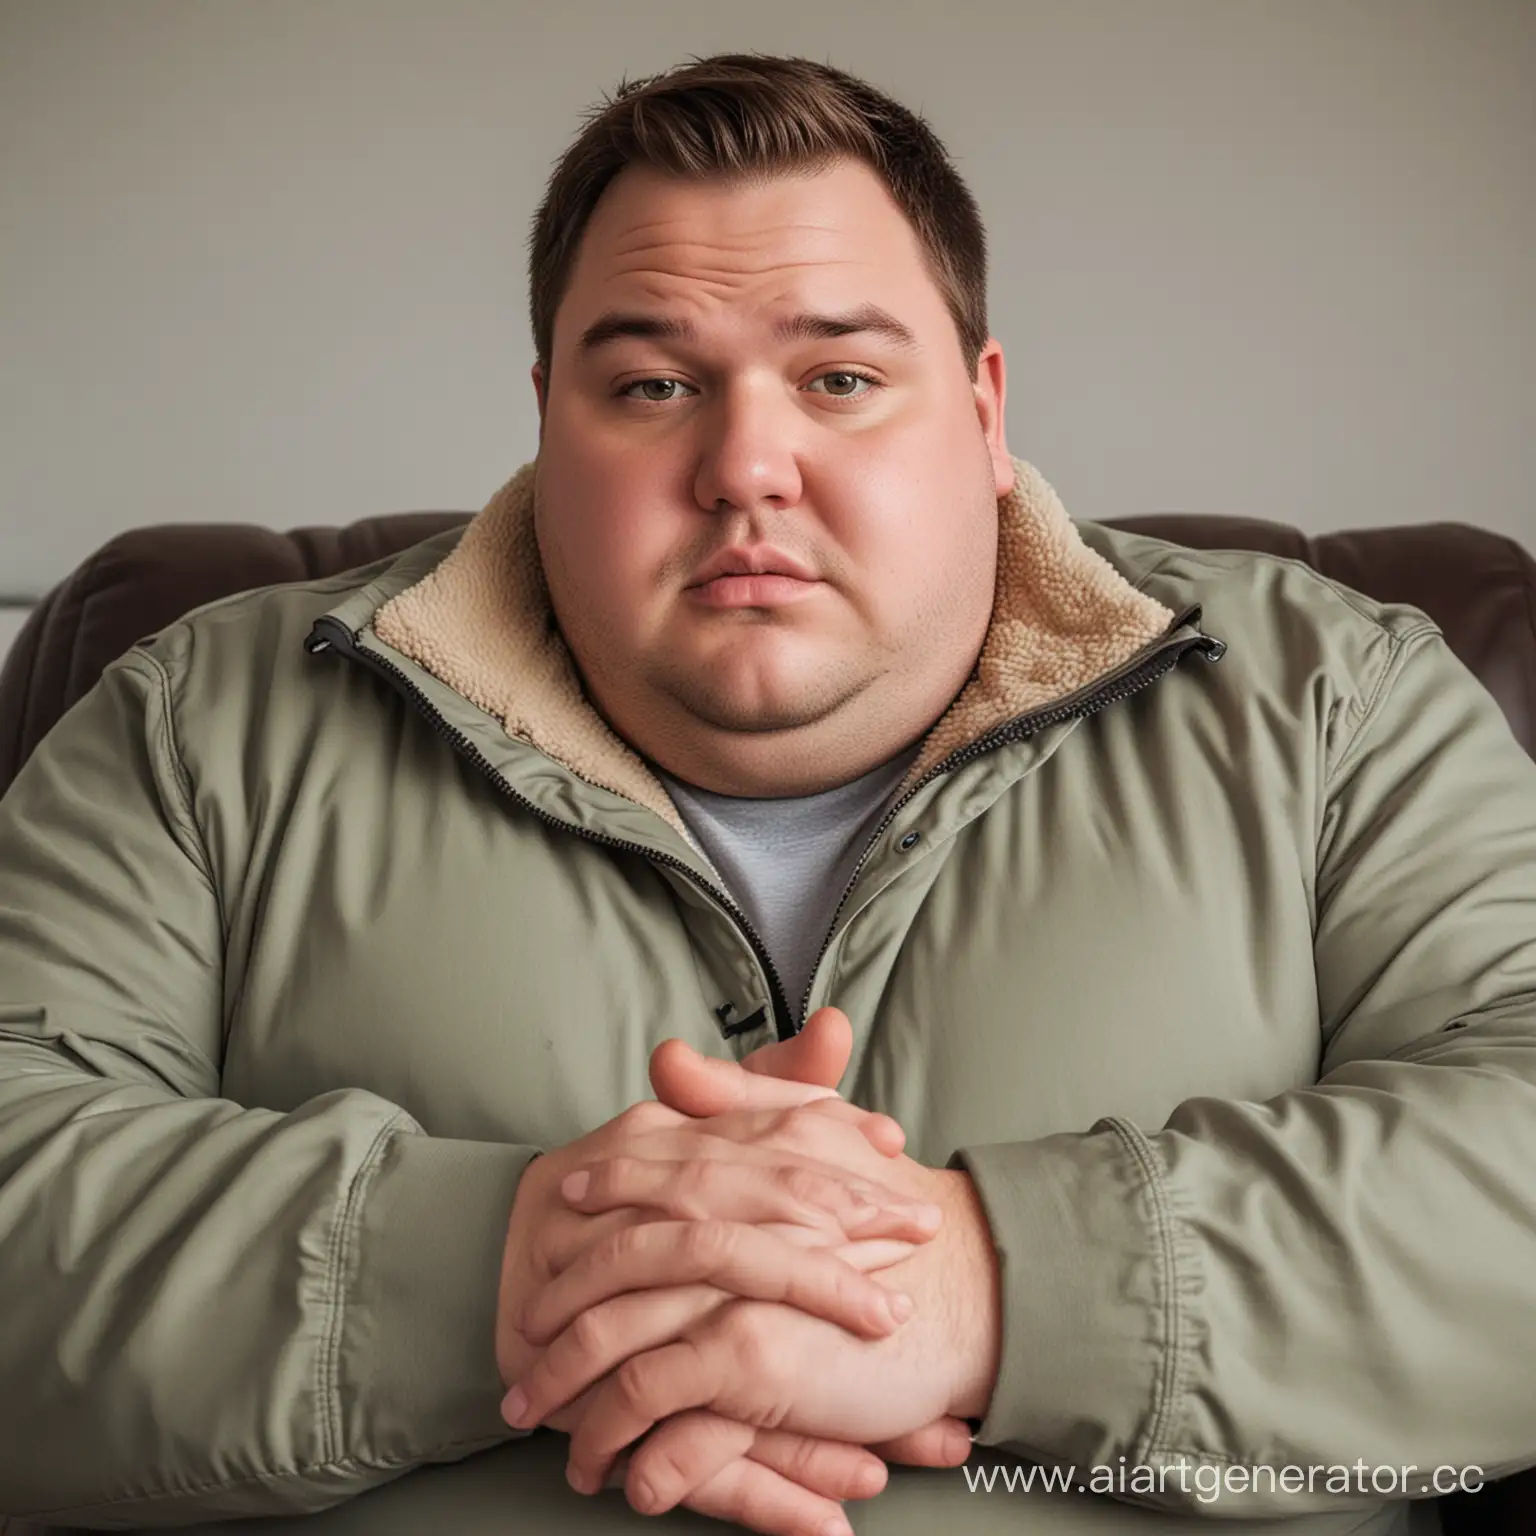 Portrait-of-Overweight-Man-in-Jacket-Sitting-on-Chair